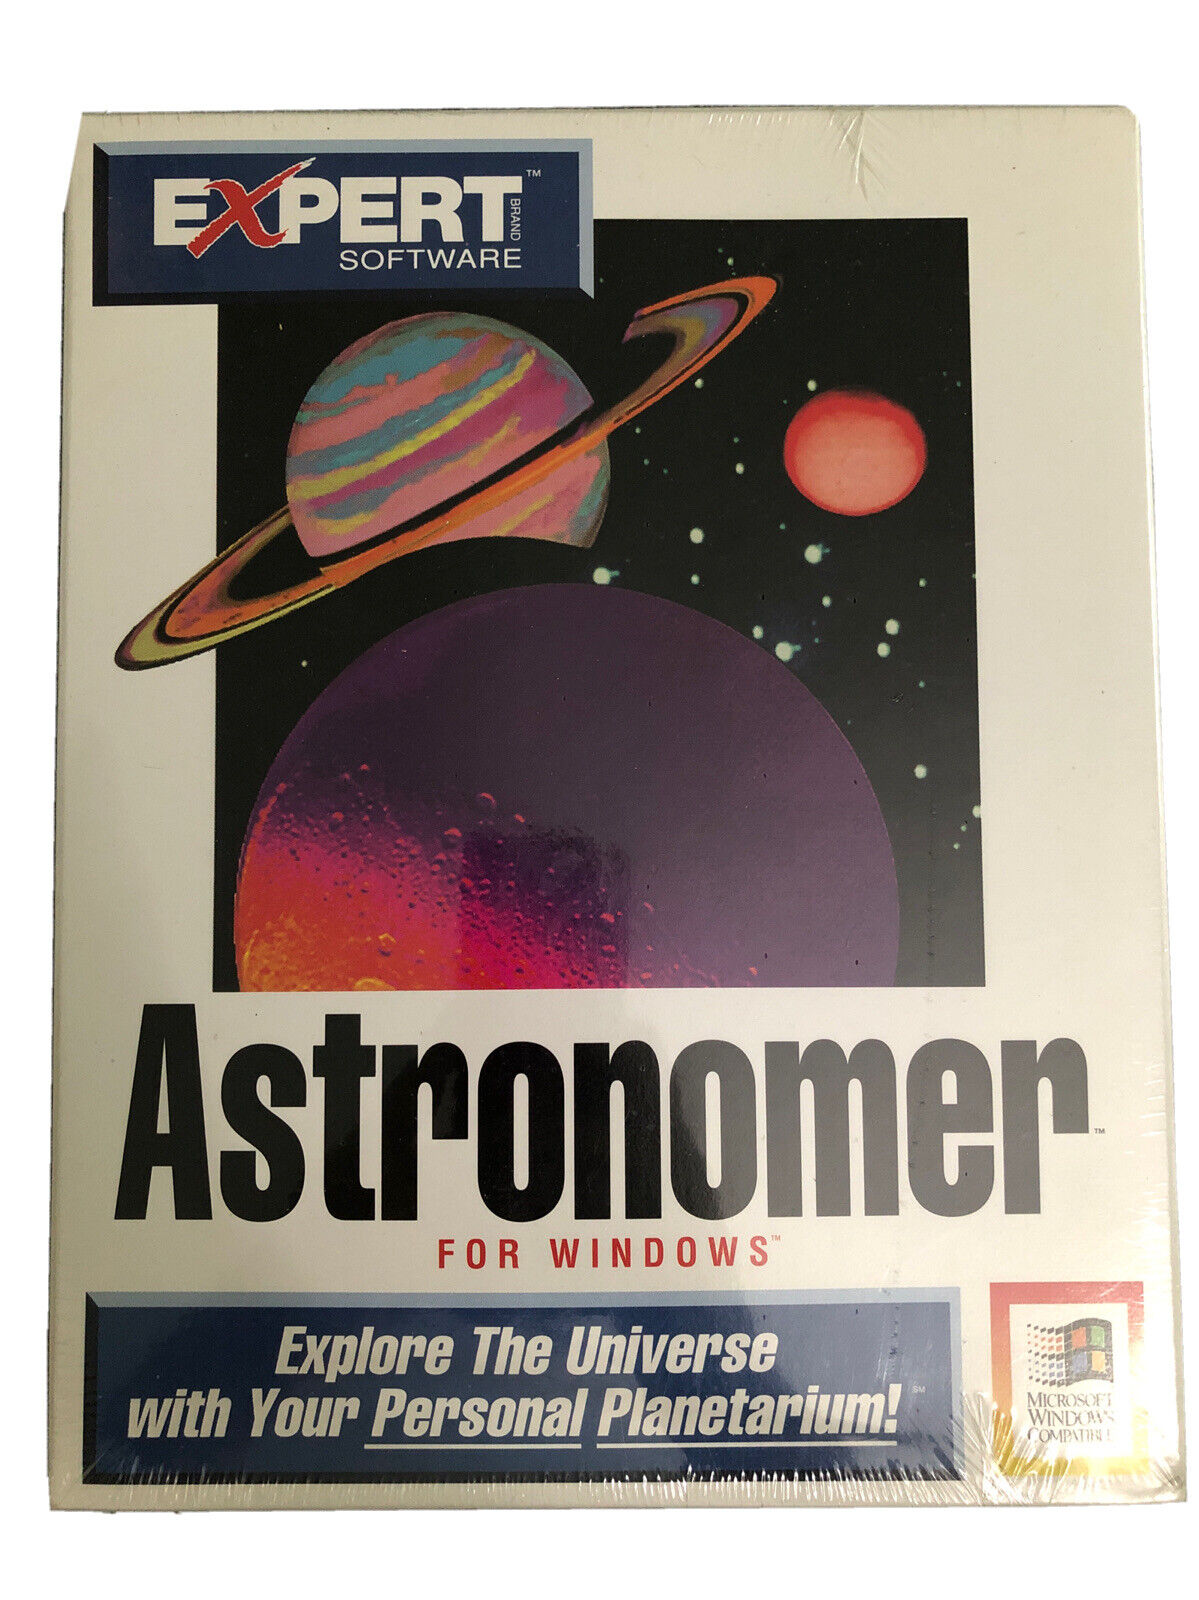 Vintage EXPERT ASTRONOMER Software Floppy Astronomy Educational PC Game Sealed